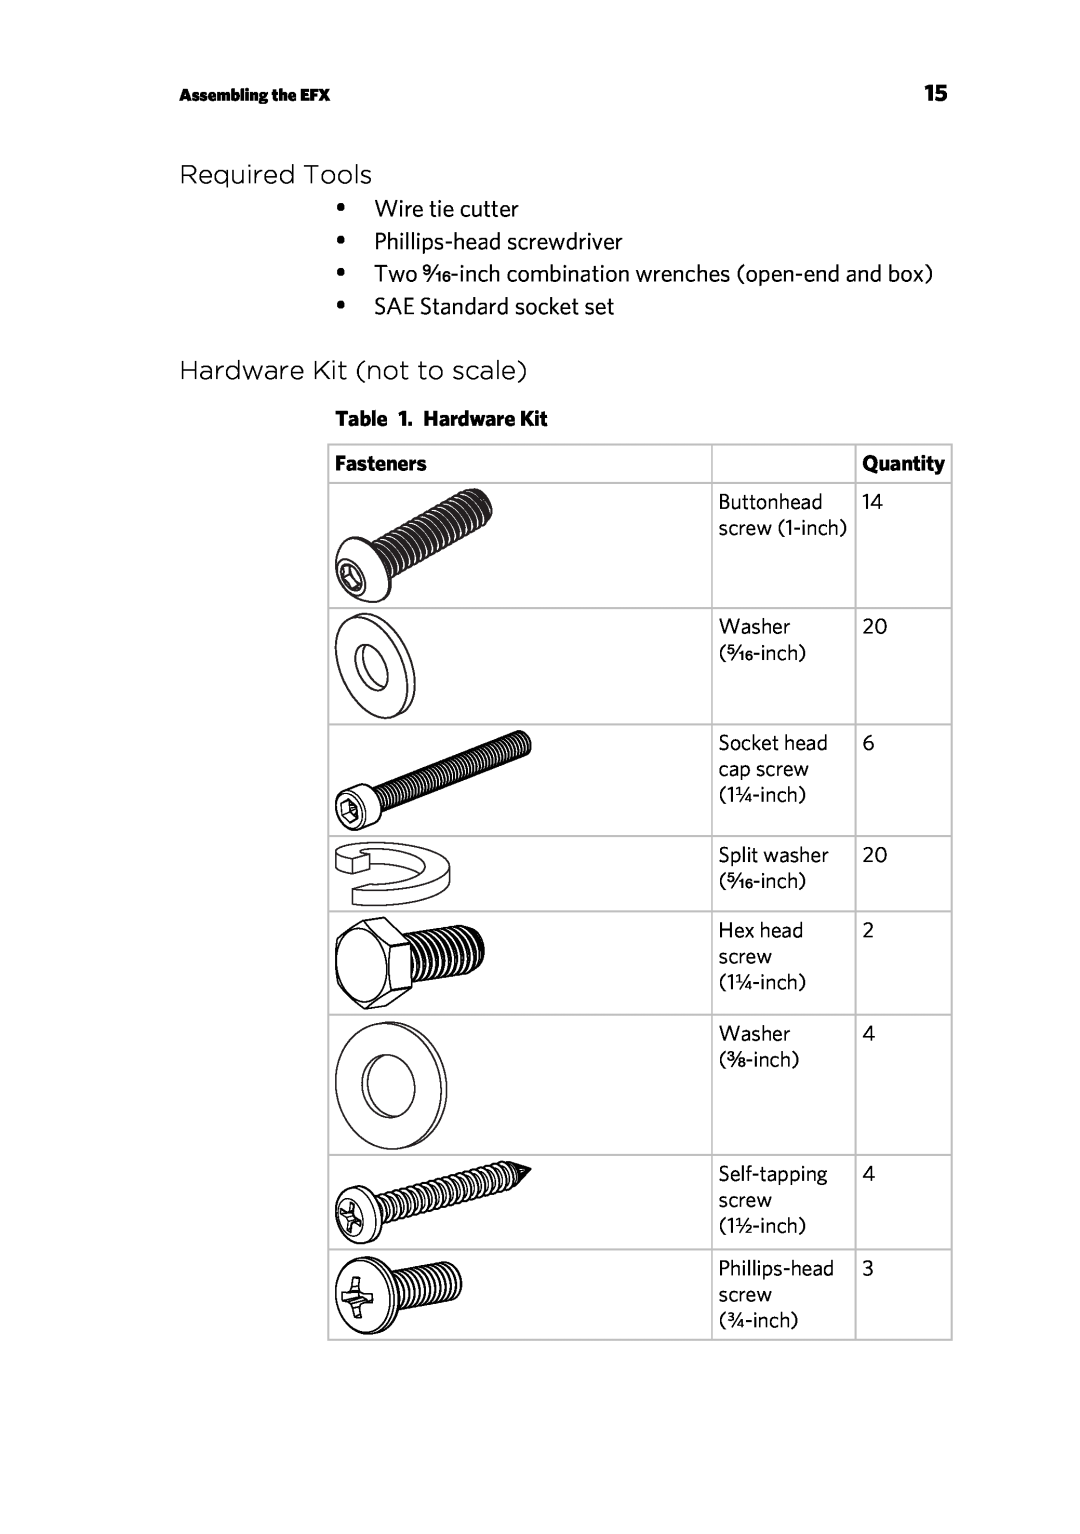 Precor 300753-201 Required Tools, Hardware Kit not to scale,  Wire tie cutter  Phillips-head screwdriver, Fasteners 